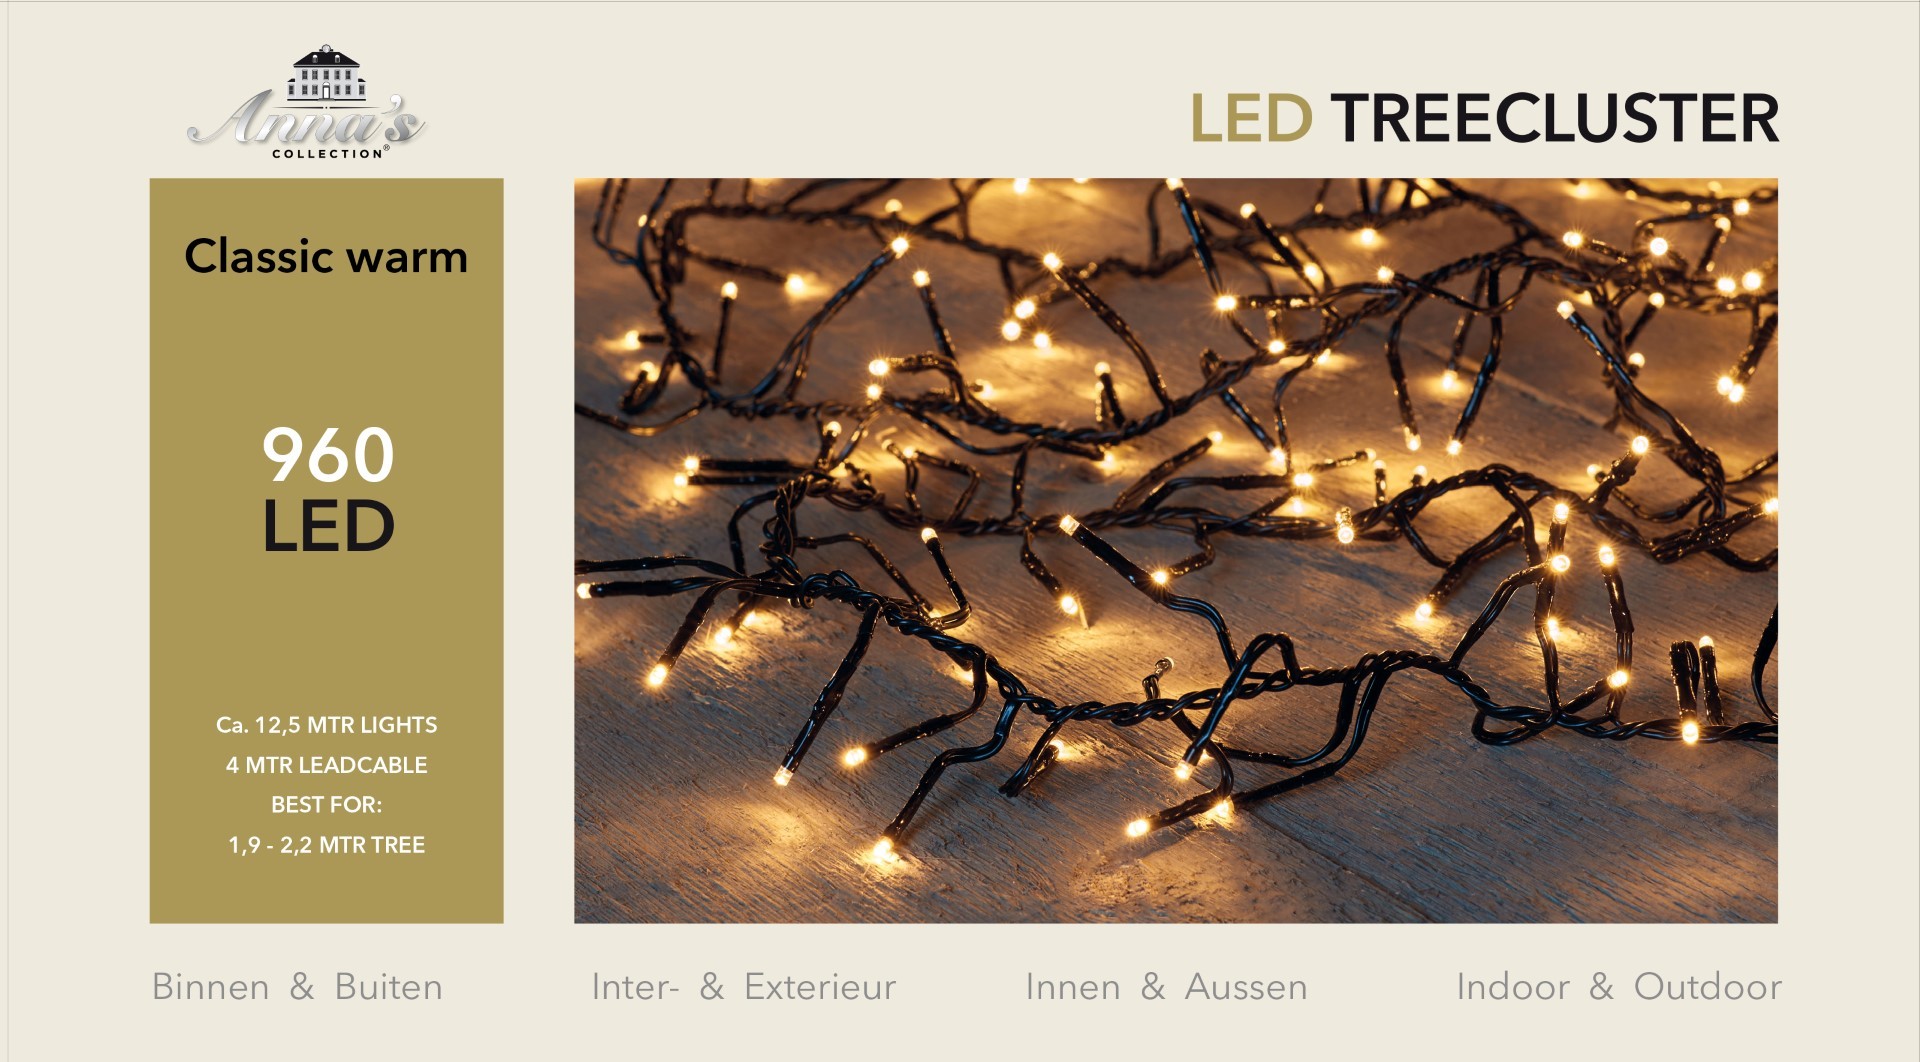 1,9-2,2m treecluster 12,5m/960led classic warm Anna's collection